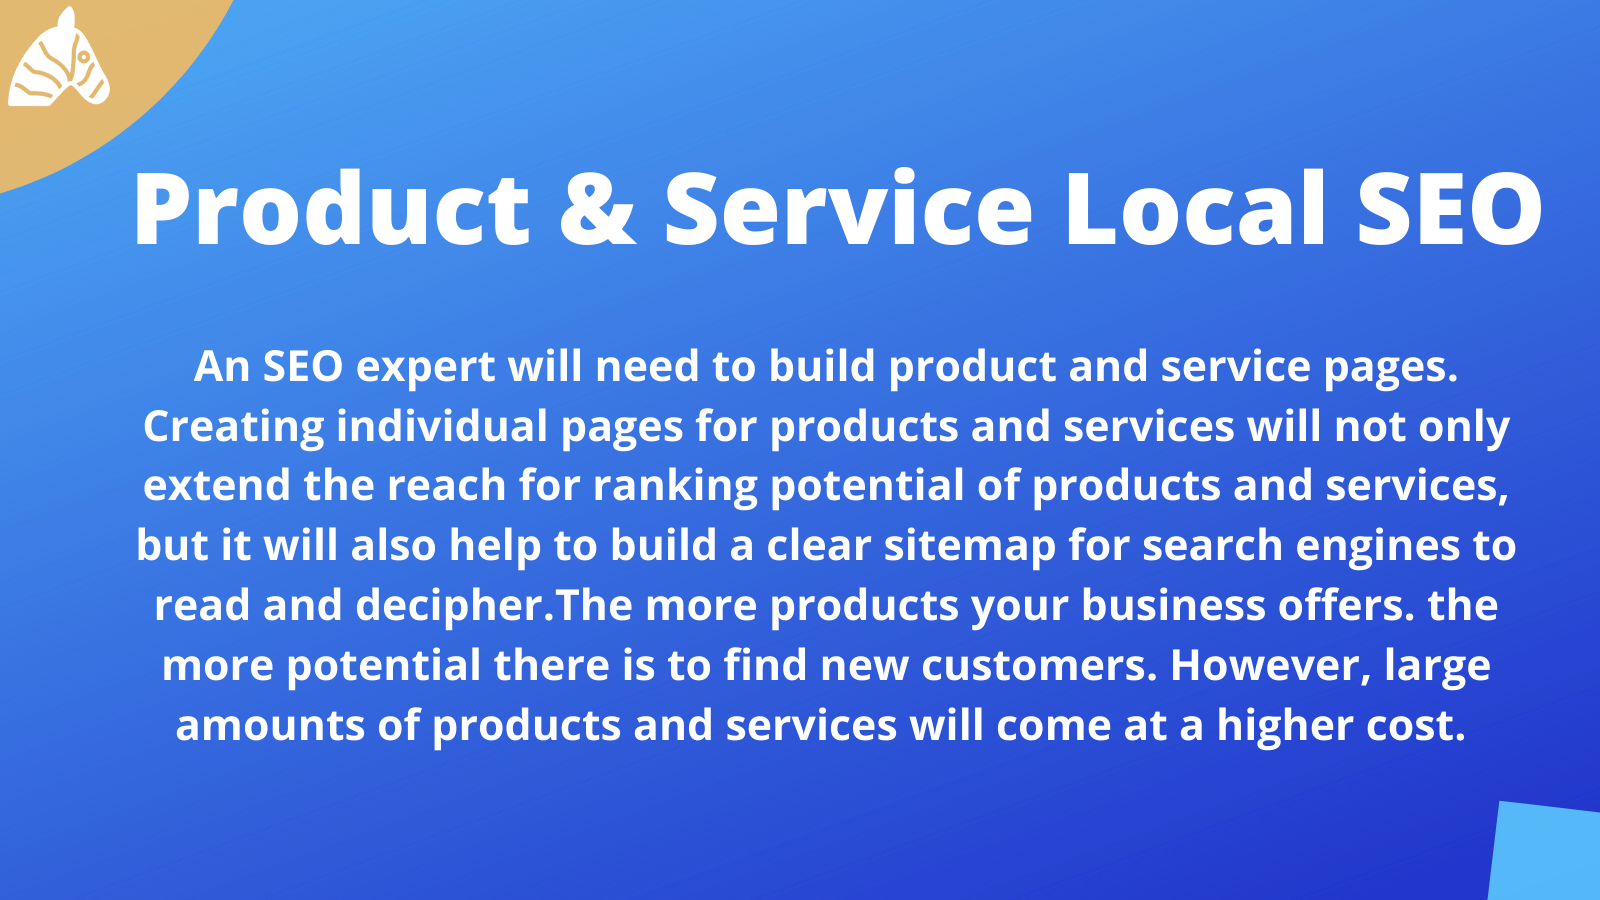 information on product and service pages and how they influence local SEO costs